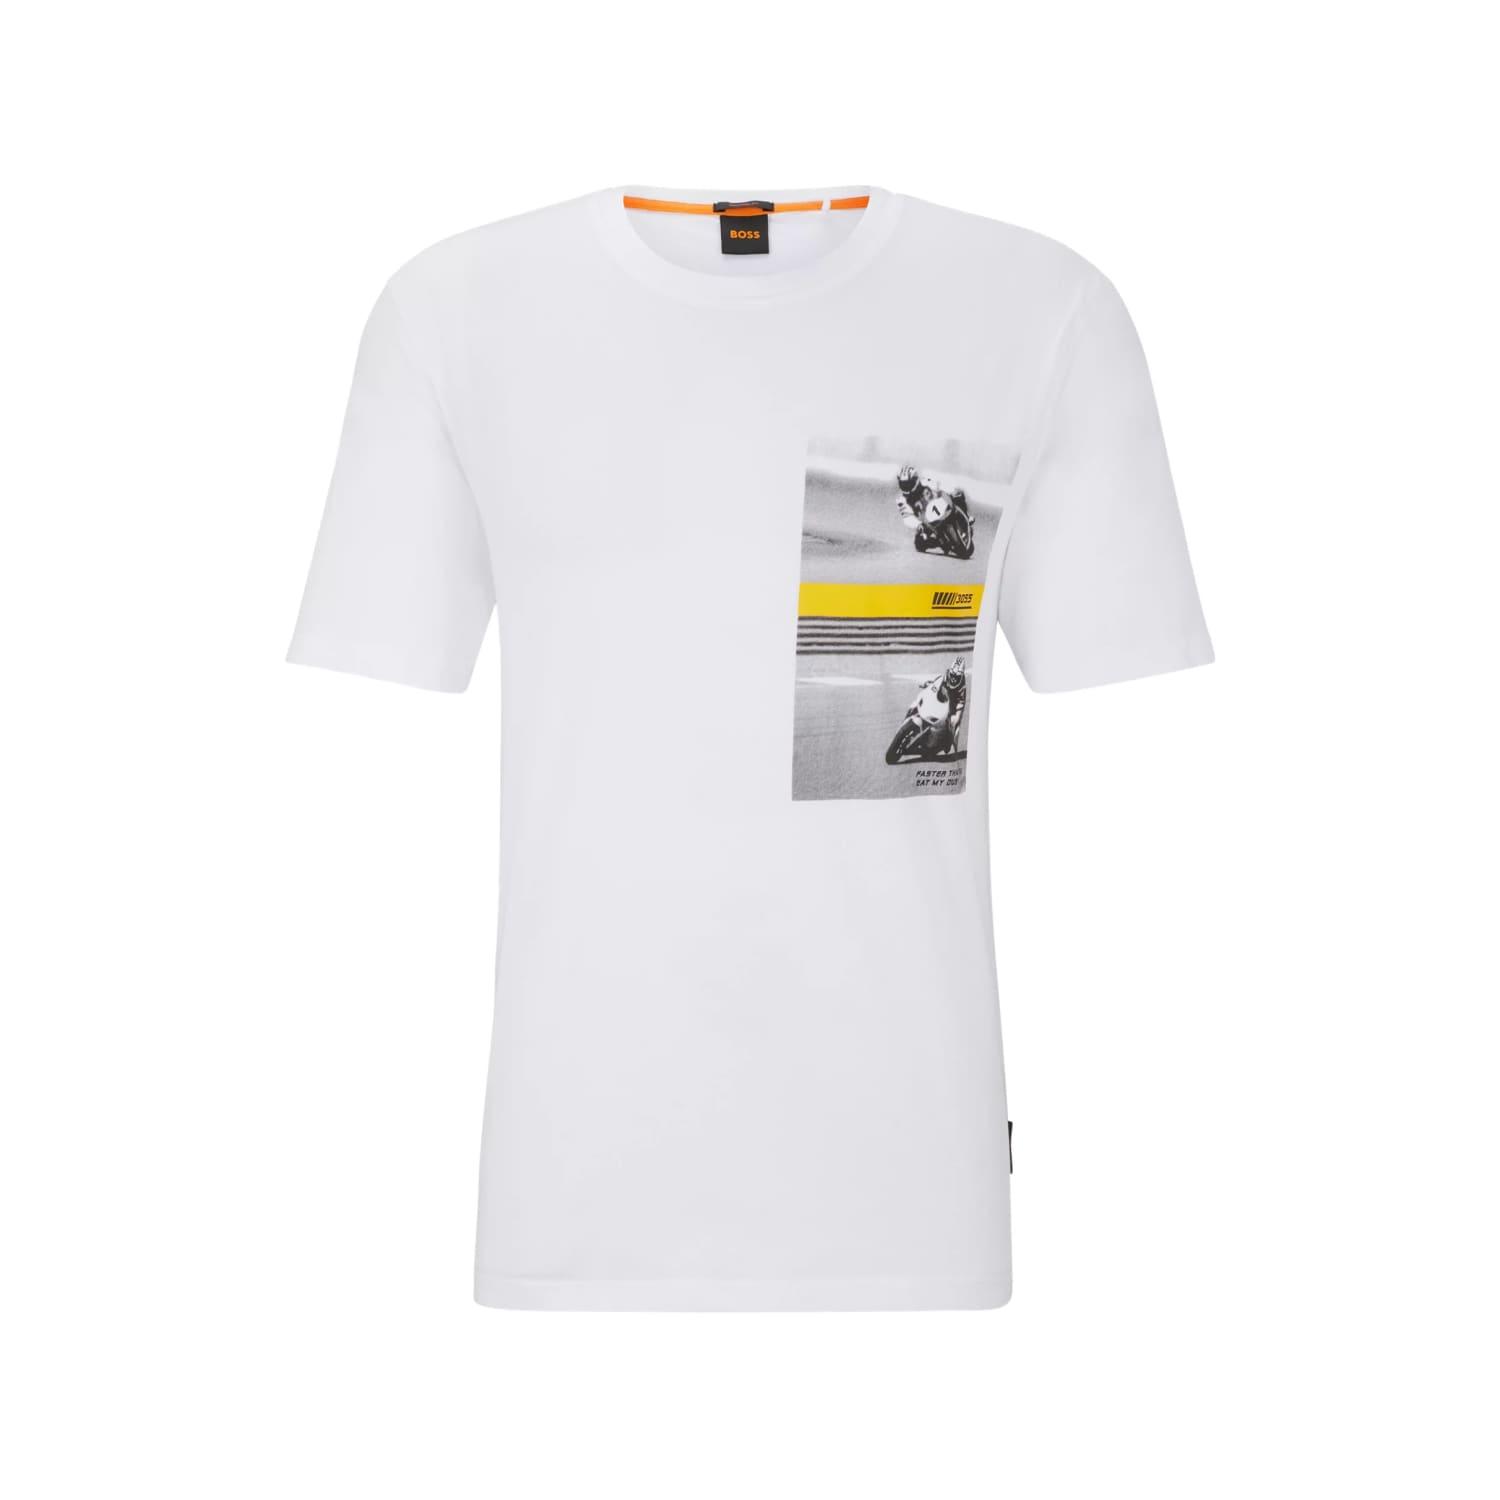 BOSS by HUGO BOSS Teemotor Graphic T-shirt Size: Xl, Col: White | Lyst